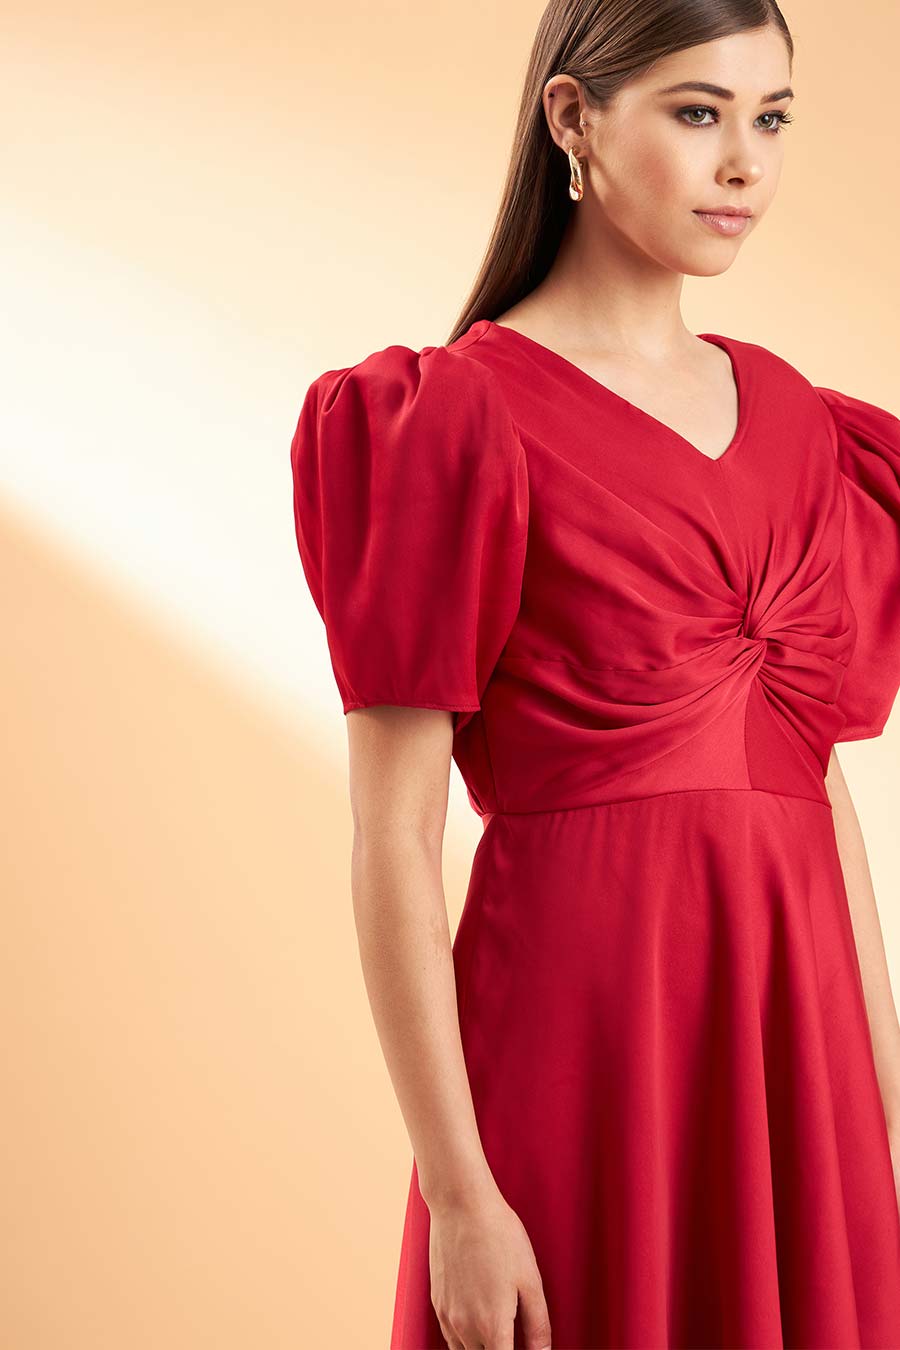 Scarlet Red Layered Dress